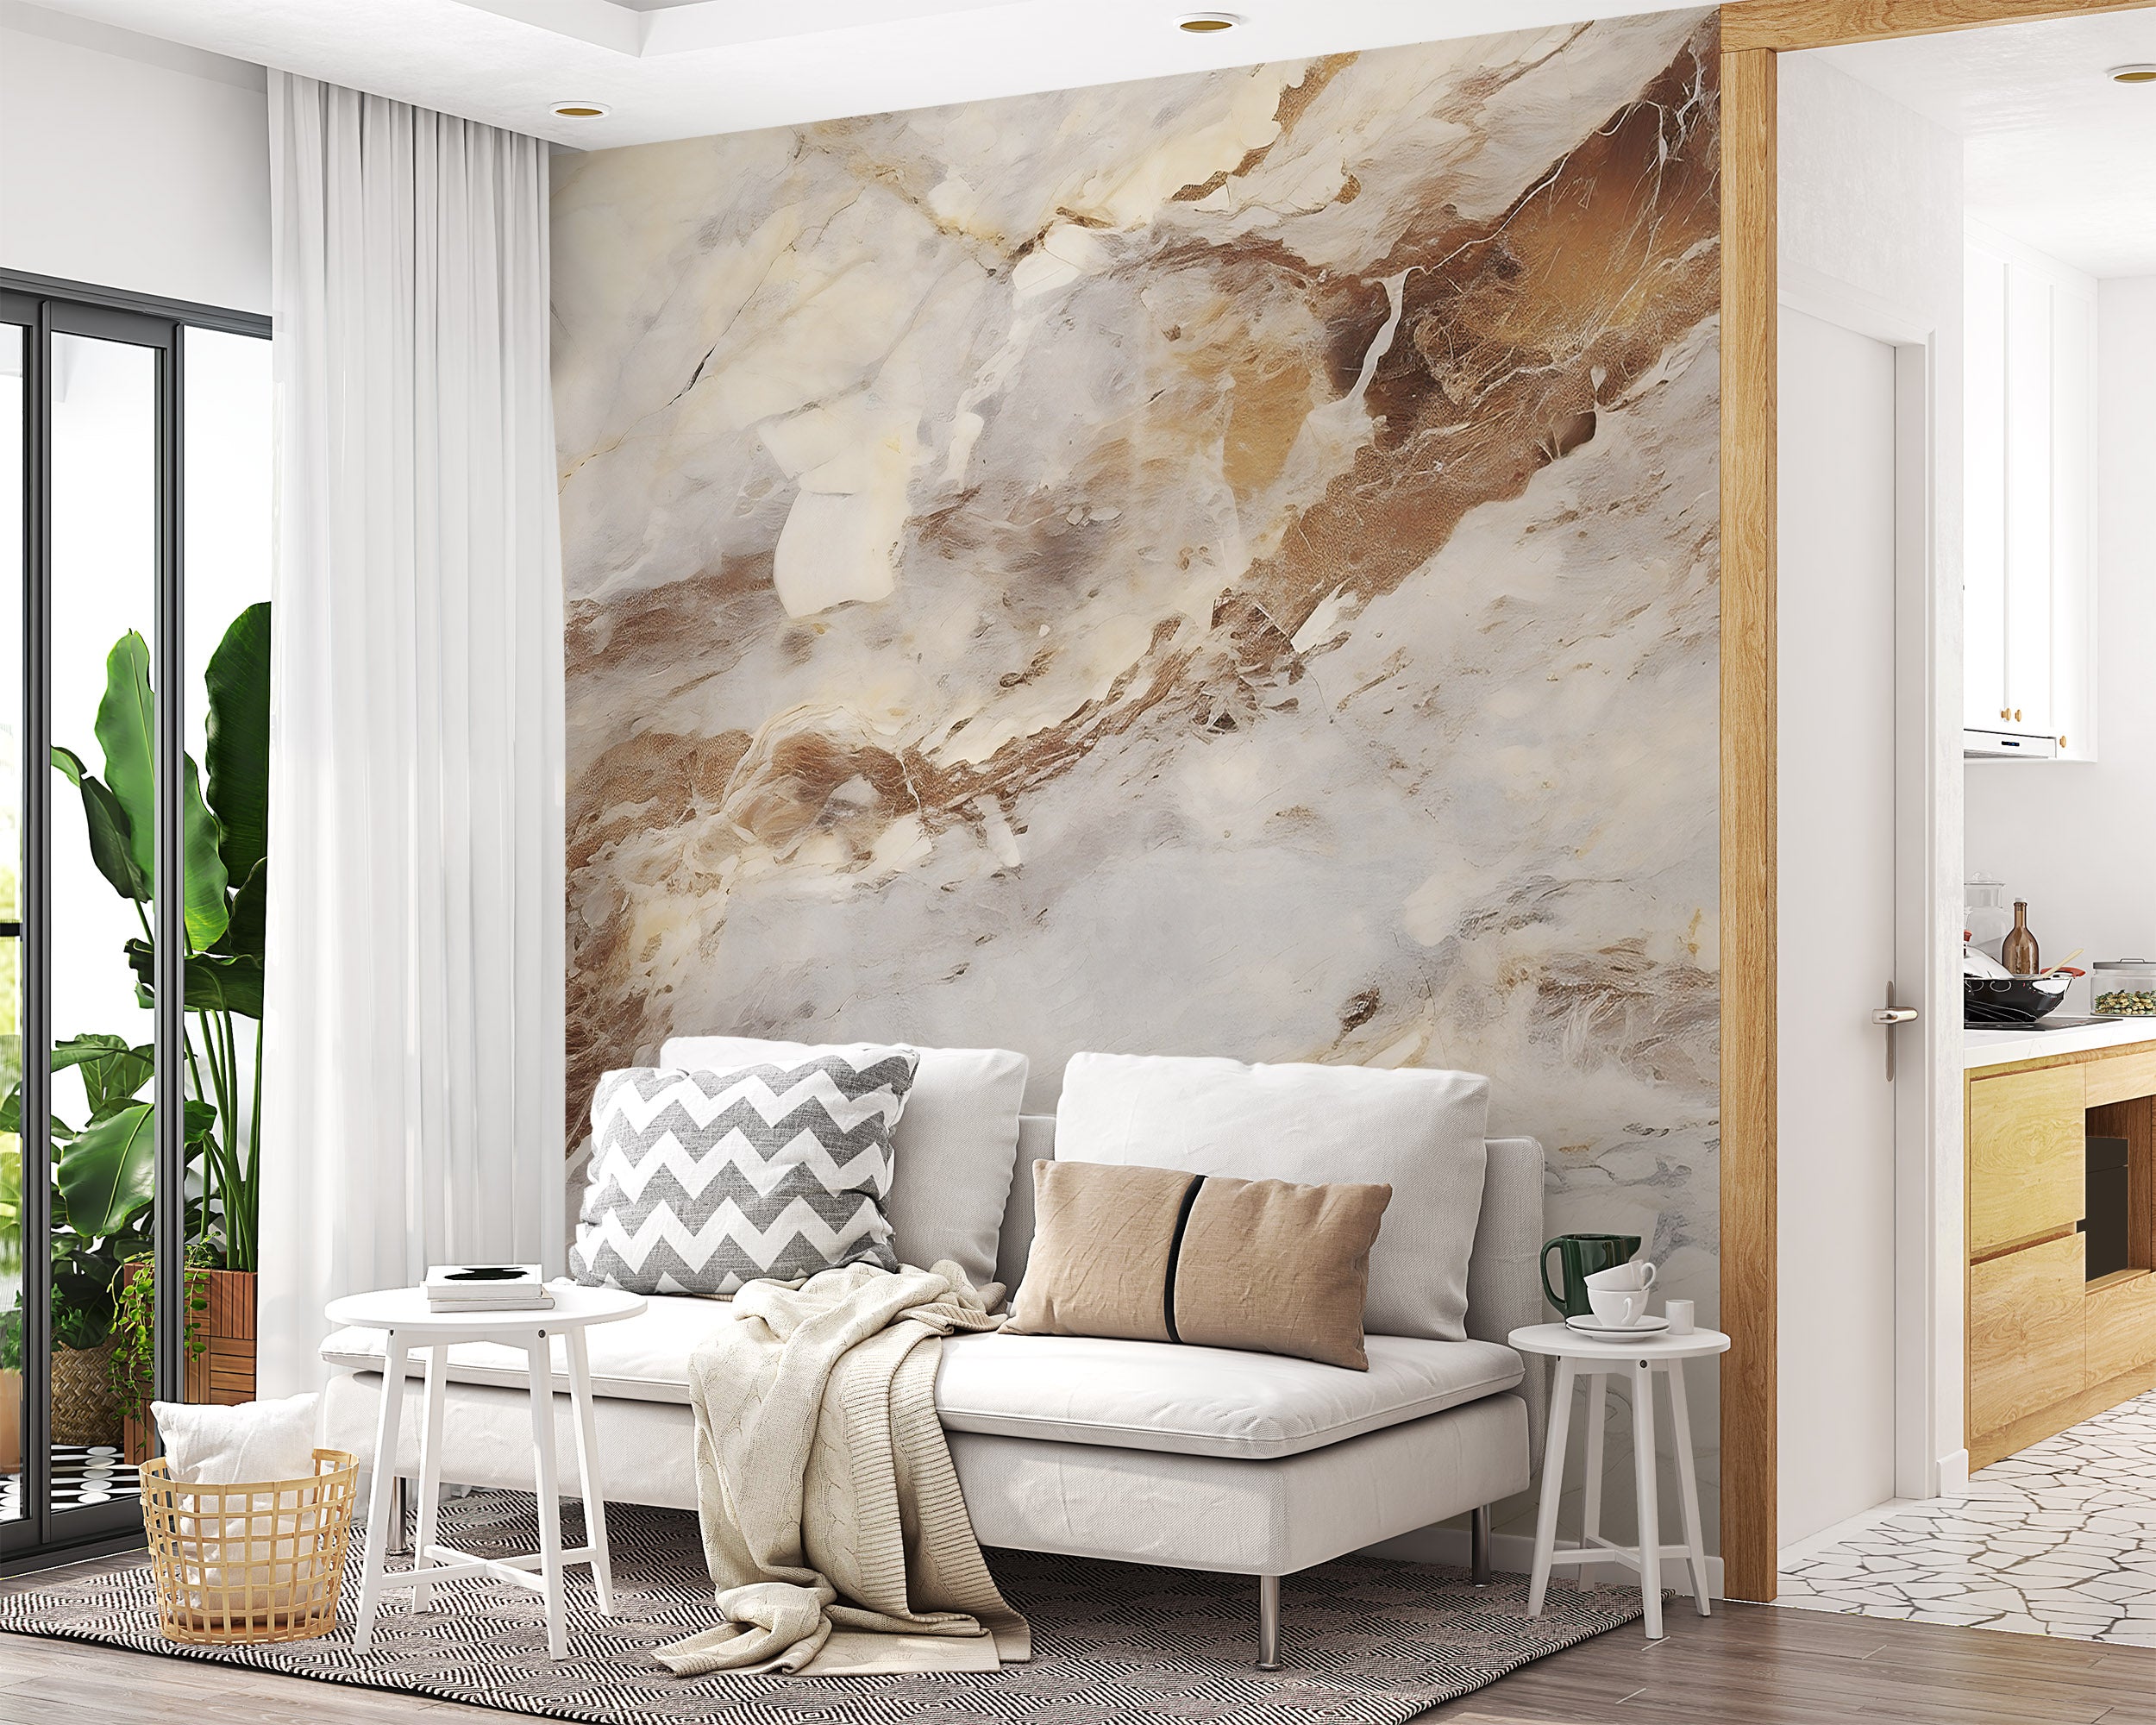 Peel and Stick Marble Wall Covering with Brown and Grey Tones for Stylish Decor